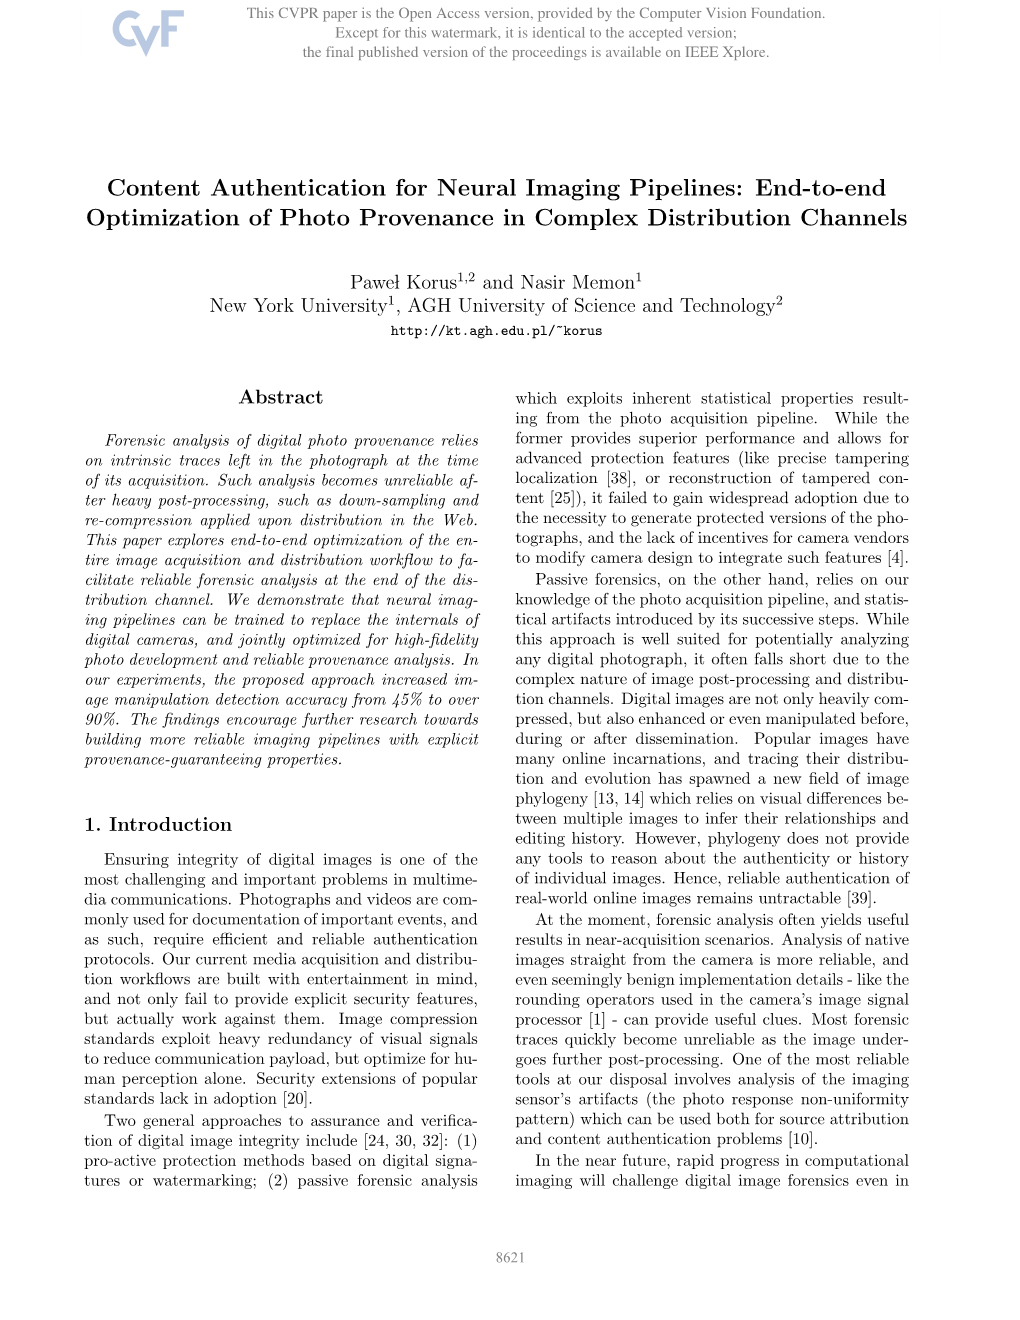 Content Authentication for Neural Imaging Pipelines: End-To-End Optimization of Photo Provenance in Complex Distribution Channels